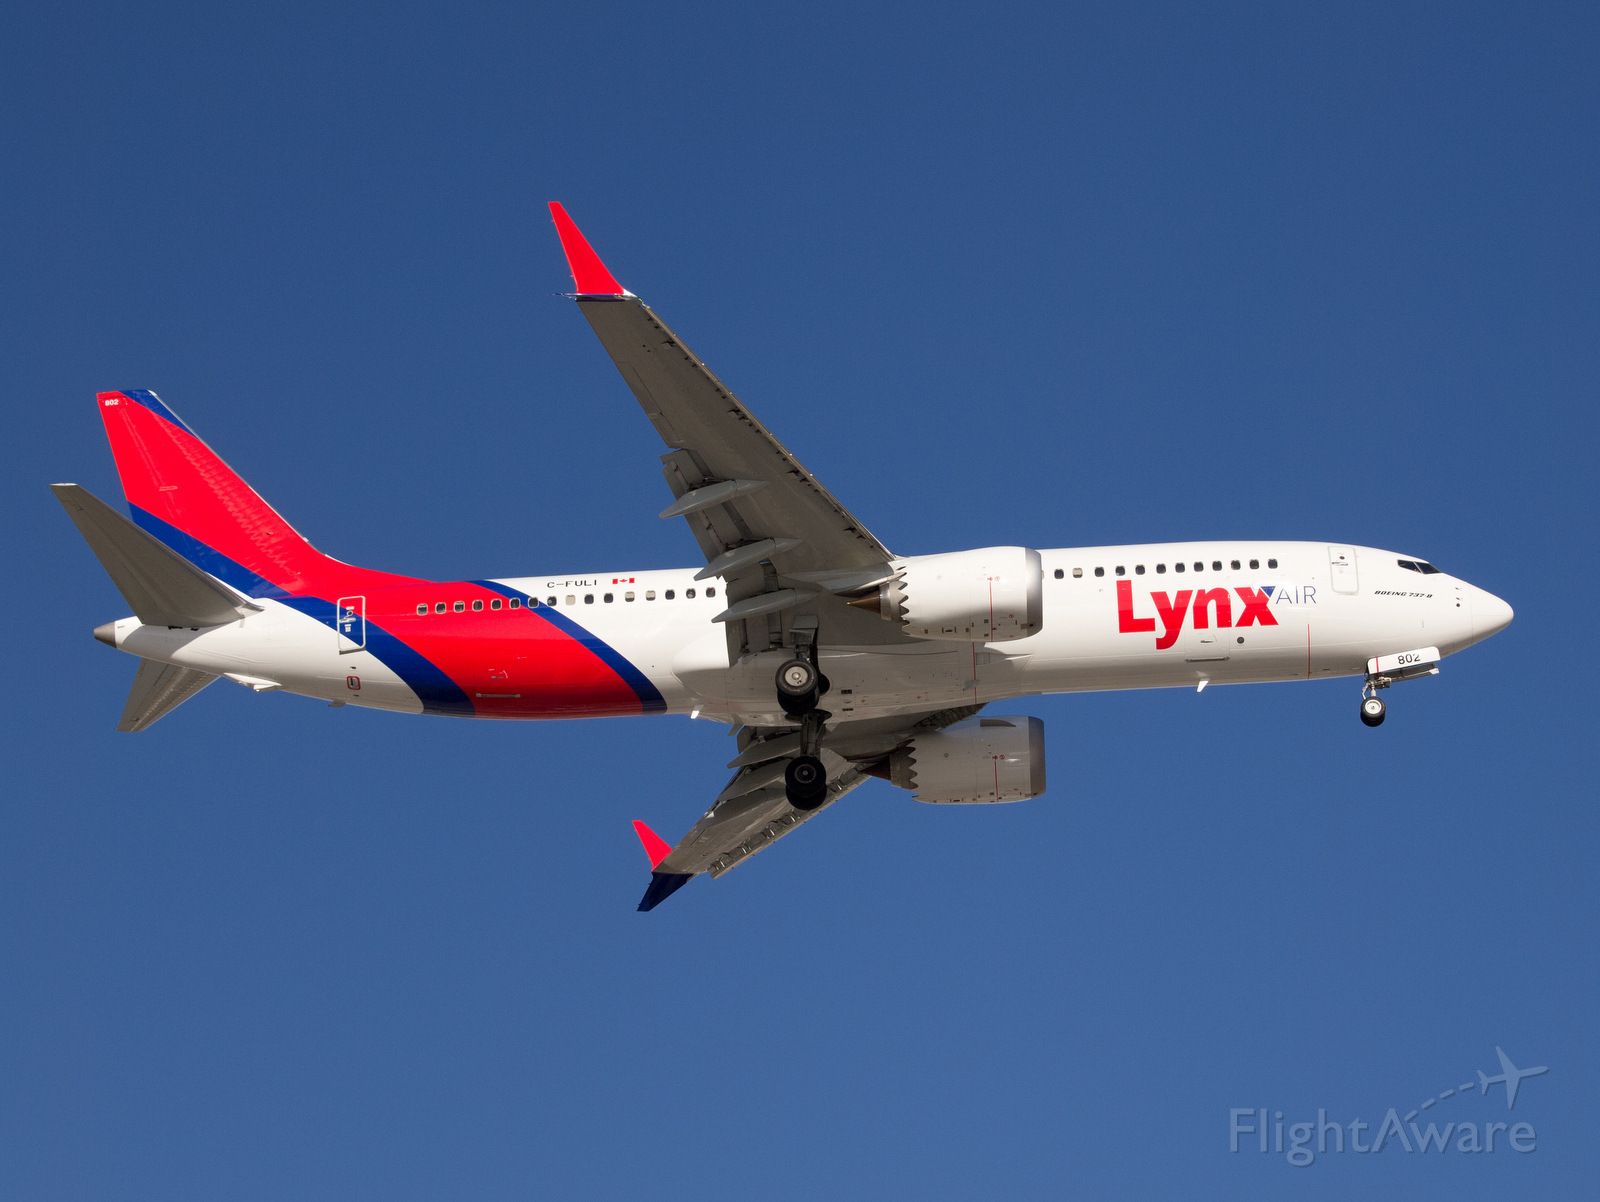 Boeing 737 MAX 8 (C-FULI) - I was out spotting to catch the new Lynx Air B38M.